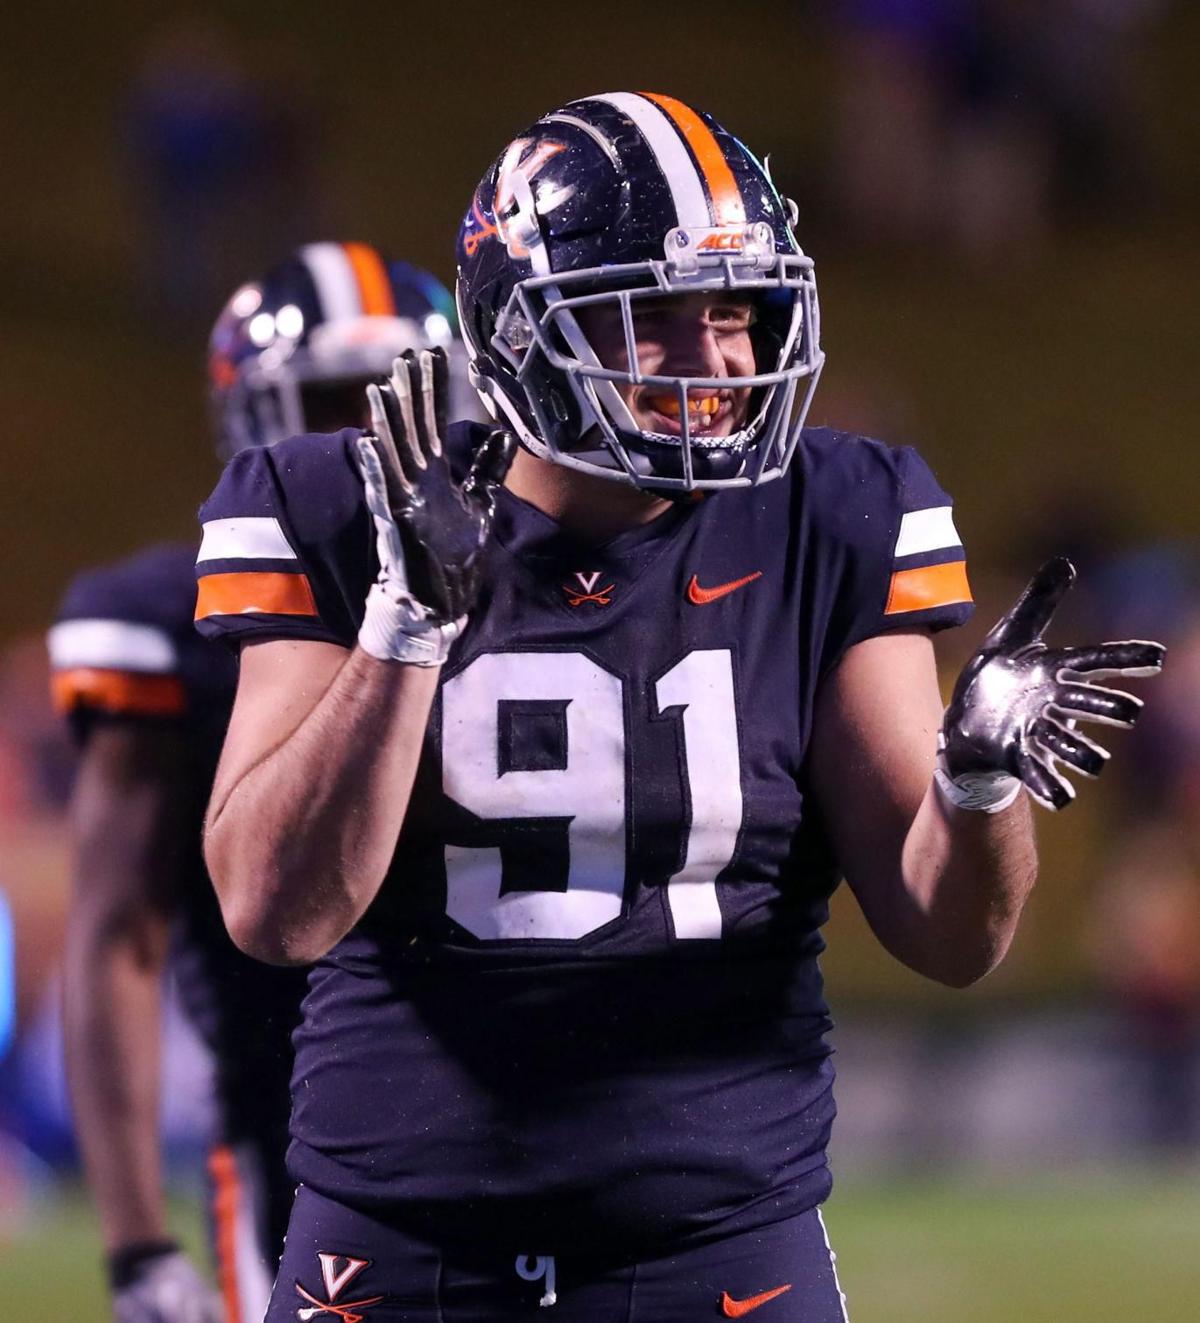 UVa football Cavaliers take injury hit along with loss to Pittsburgh